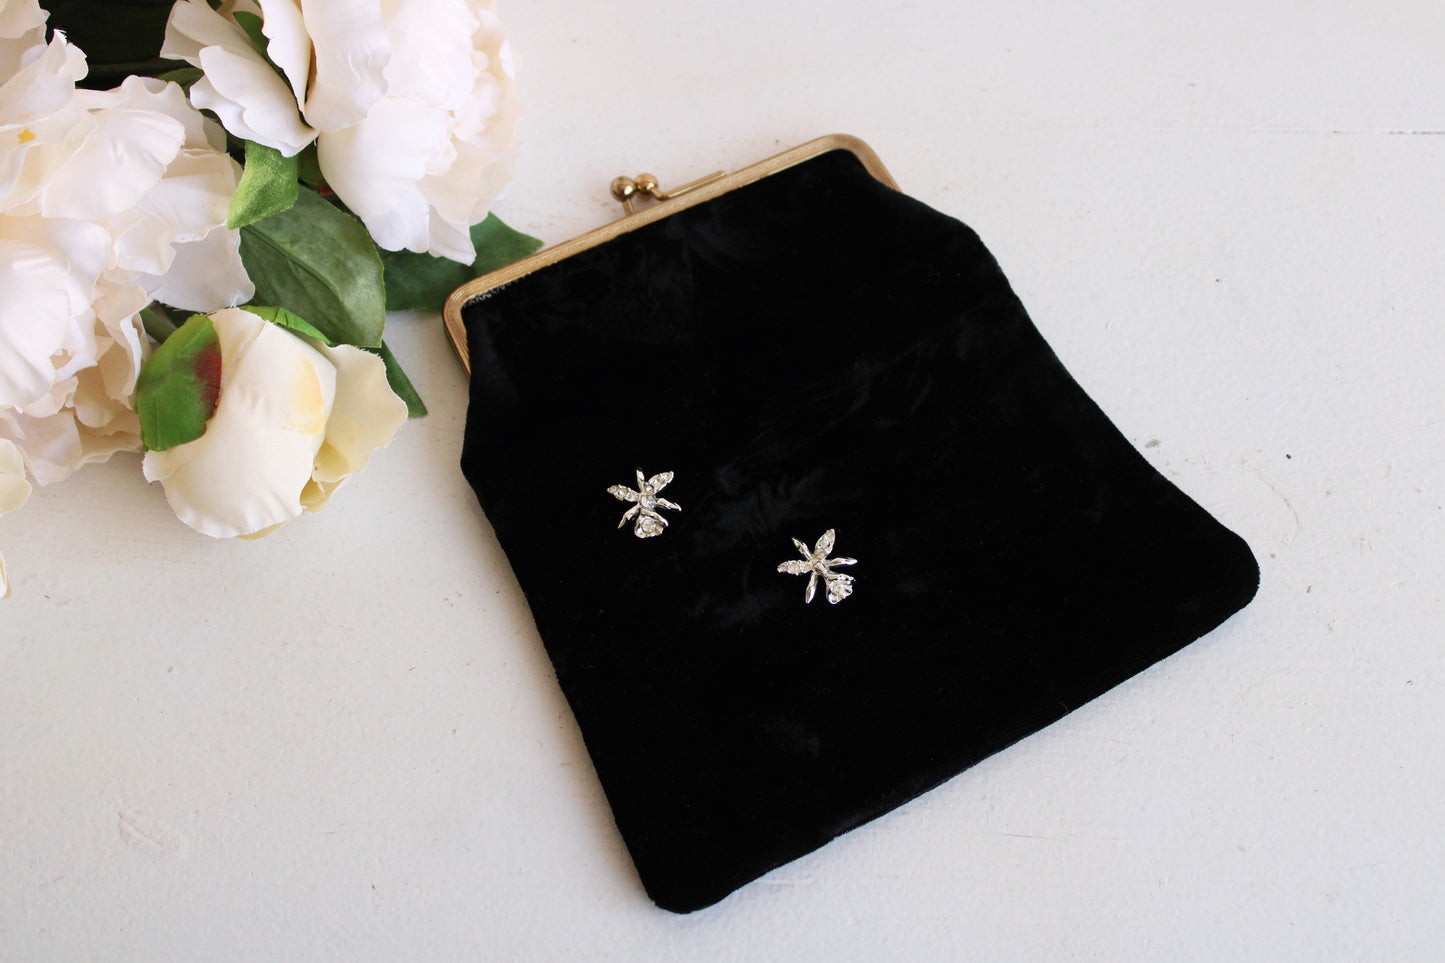 Vintage 1950s Black Velvet Clutch Purse With Rhinestone Flower Brooches And Pink Satin Lining